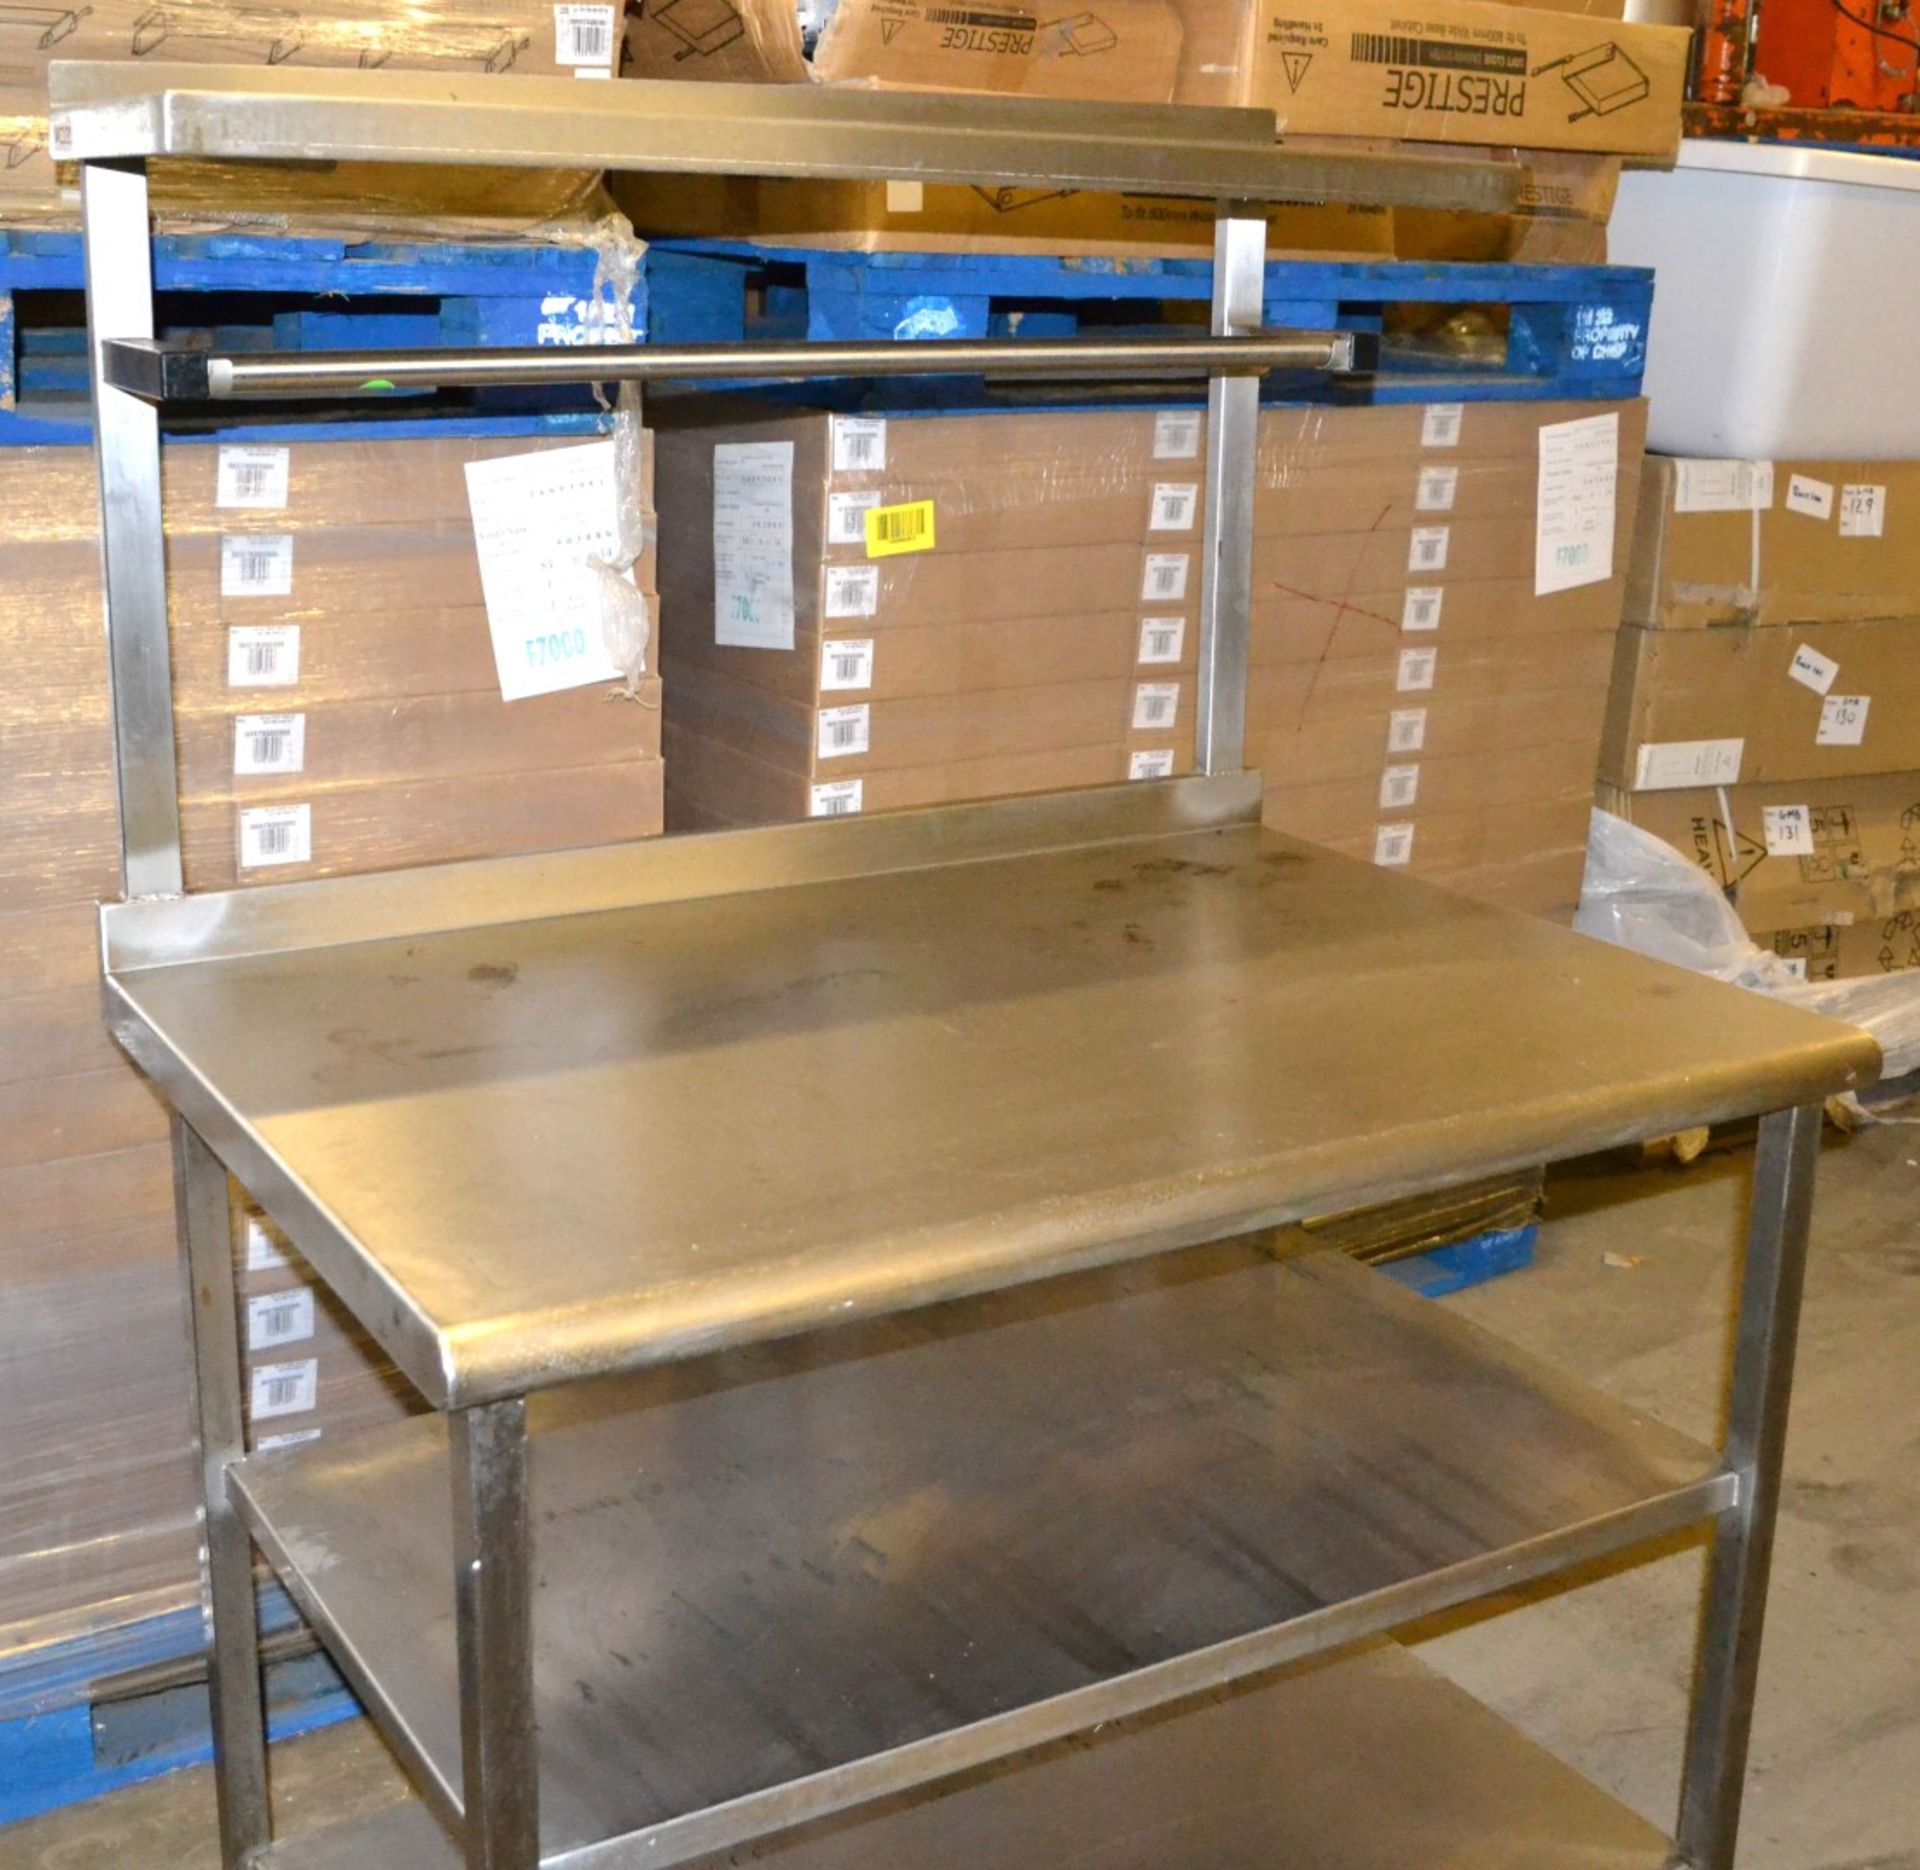 1 x Wheeled Stainless Steel Prep Table - Dimensions: 100 x 69.5 x 148cm - Ref: MC120 - CL282 - Locat - Image 9 of 11